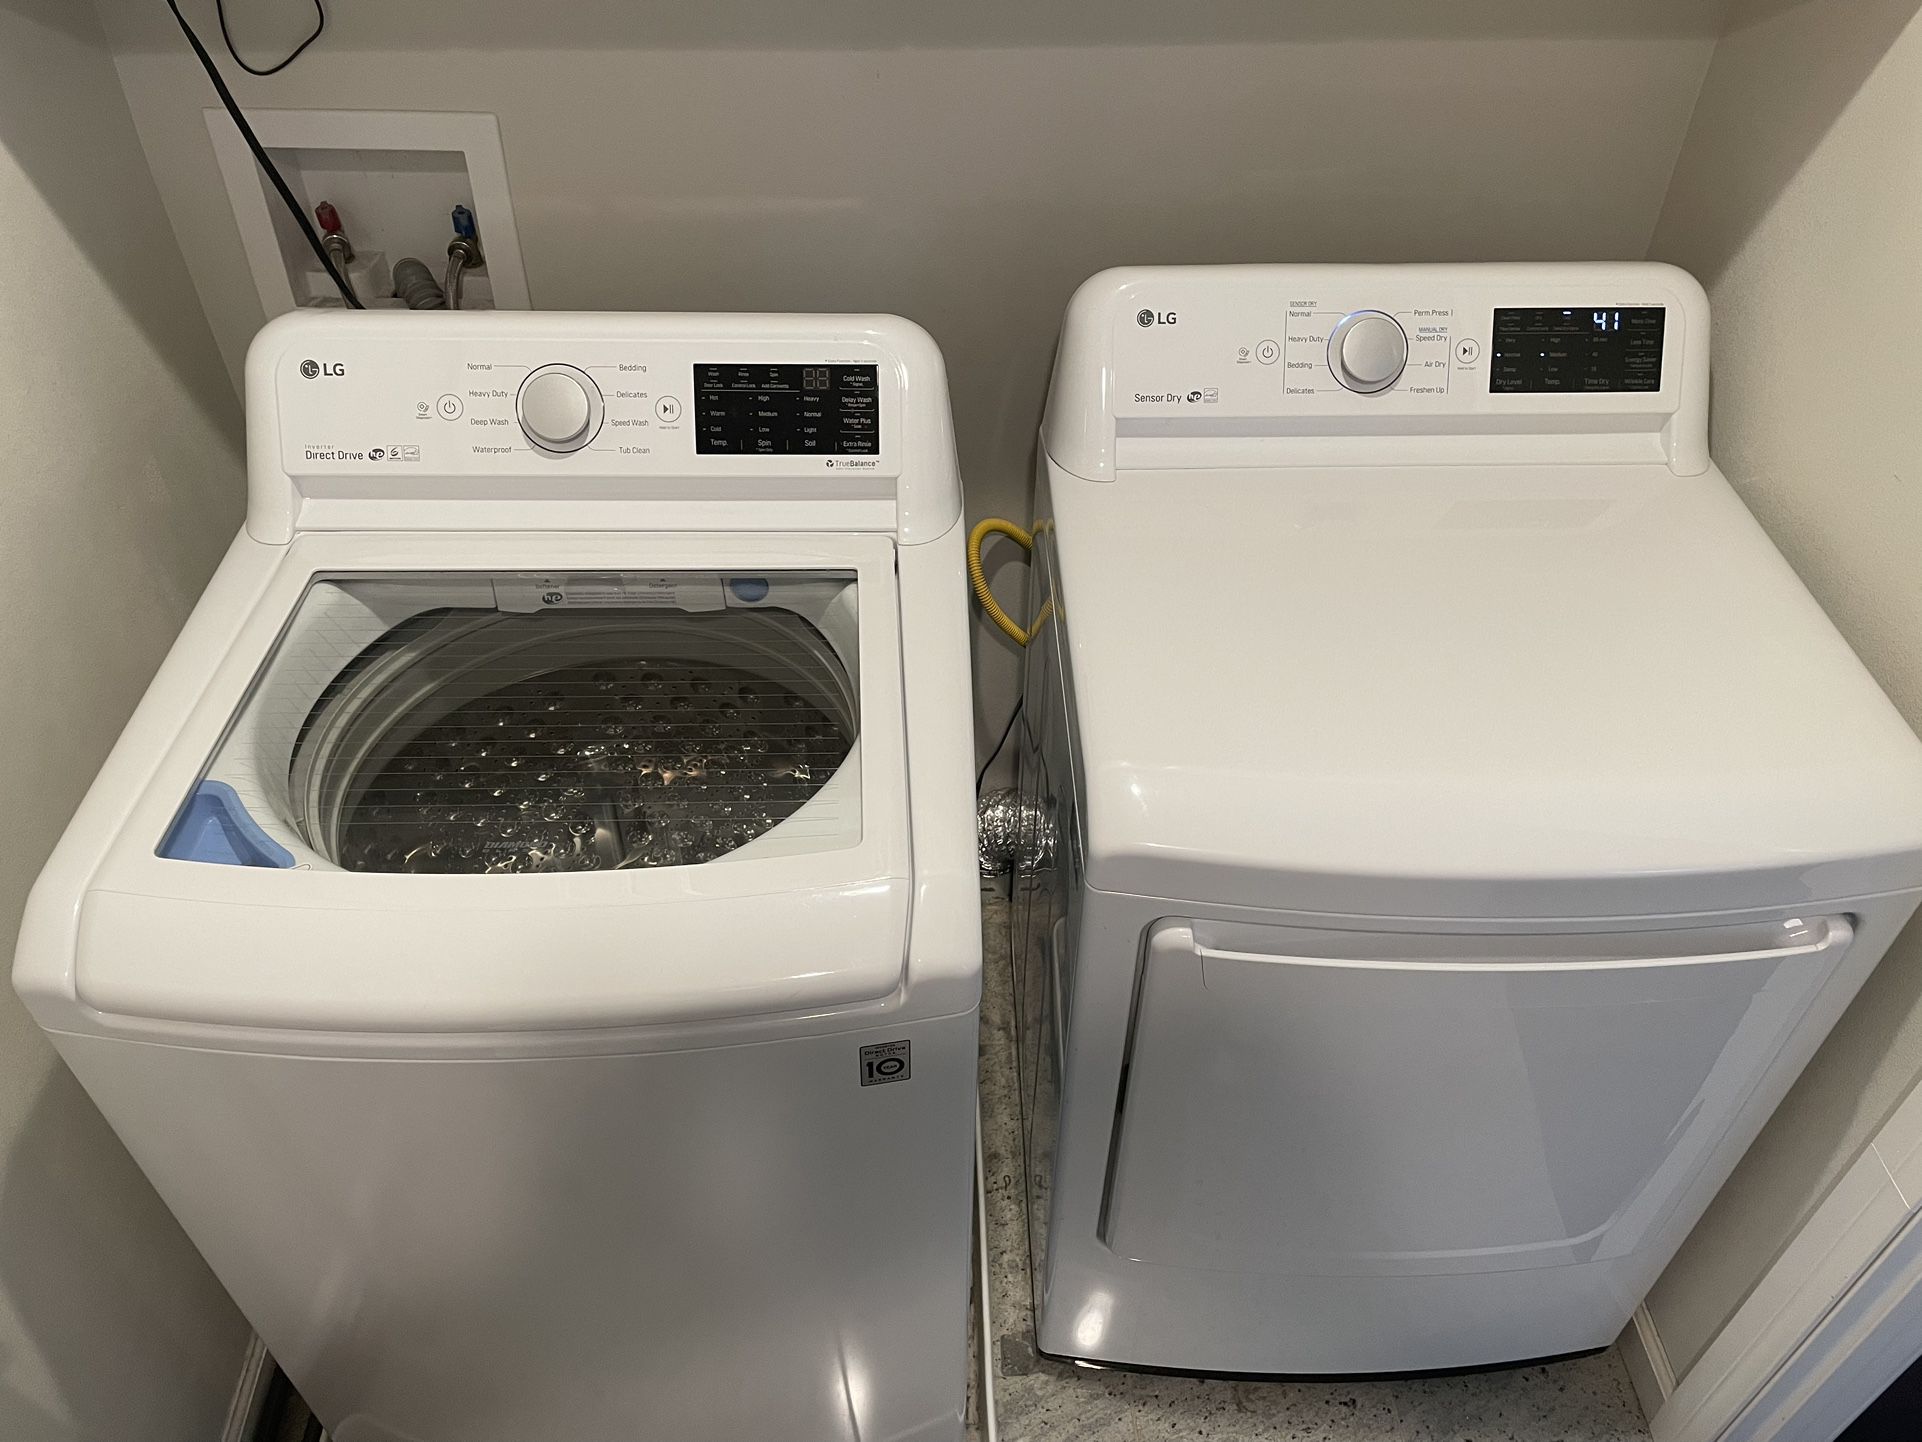 LG Washer & Dryer For Sale